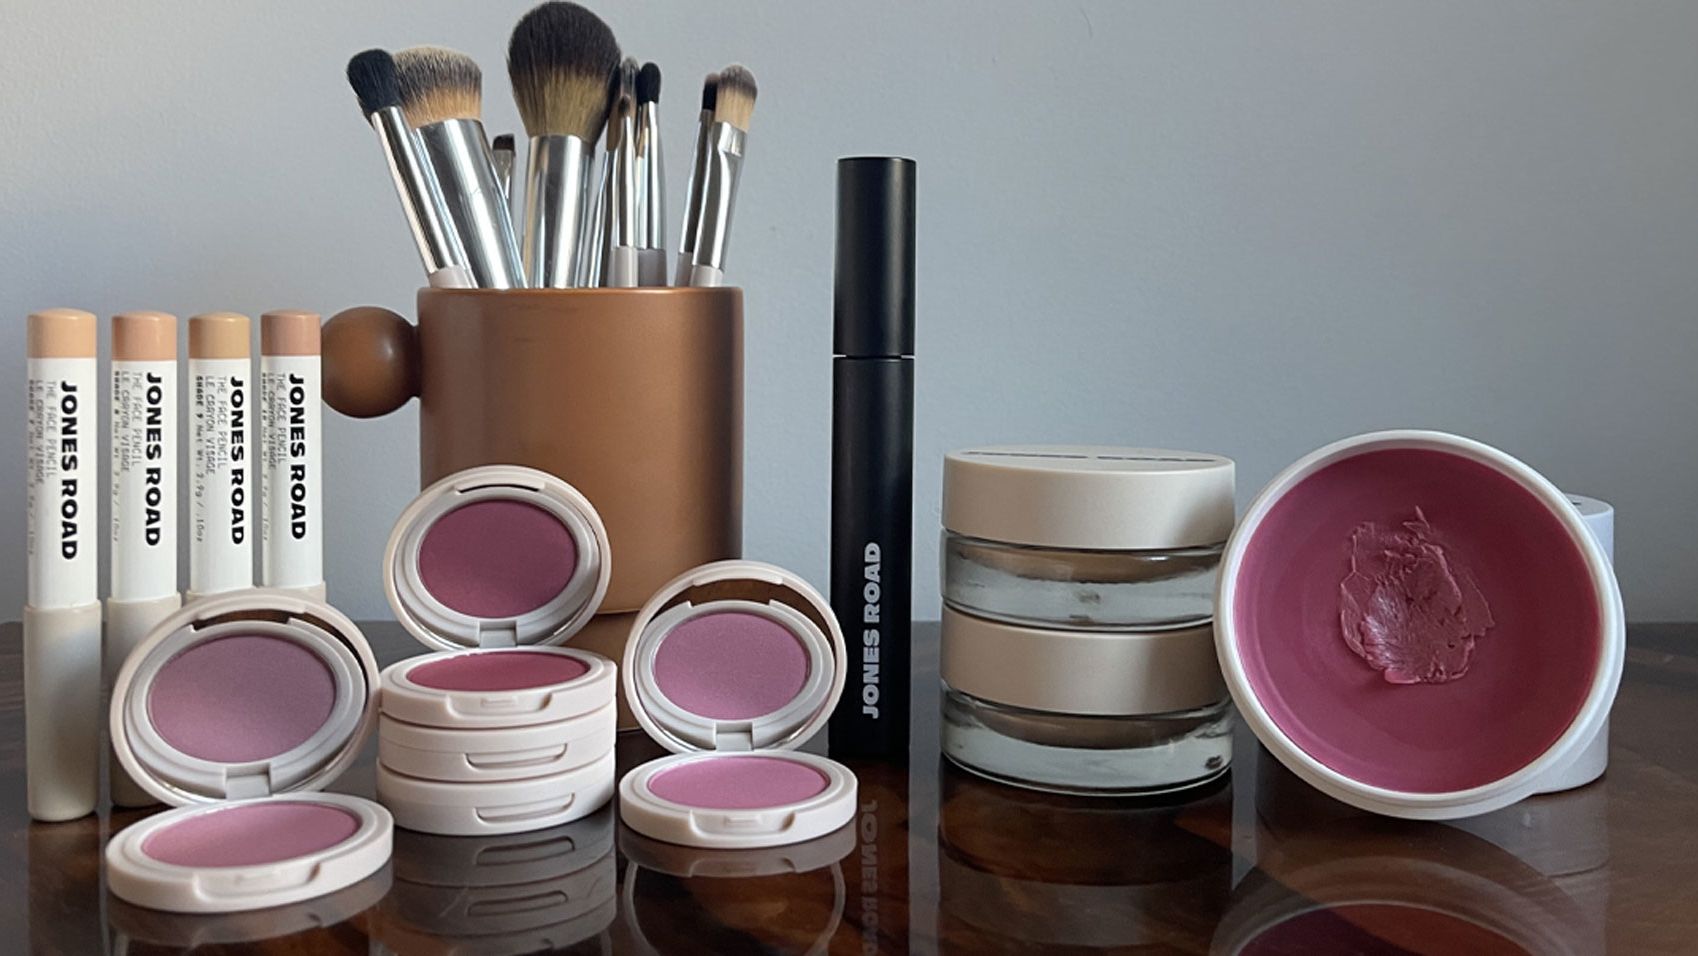 Quick makeup tools for rosy flushes of colour. Mix and match